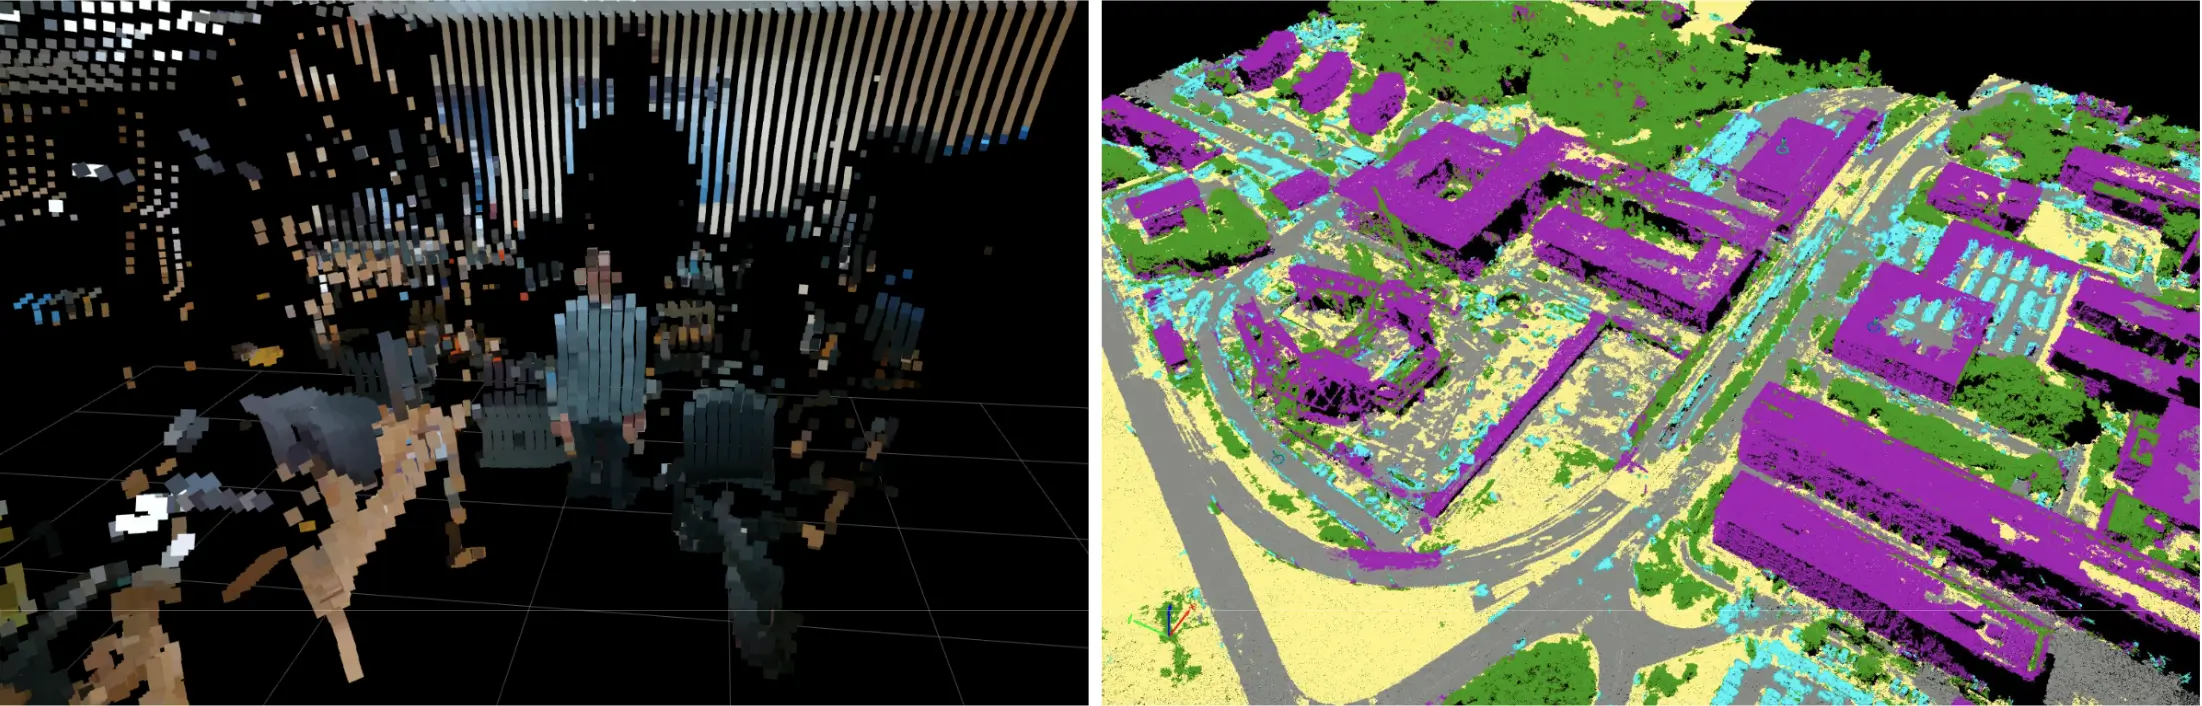 Visualizing Point Clouds with Custom Colors